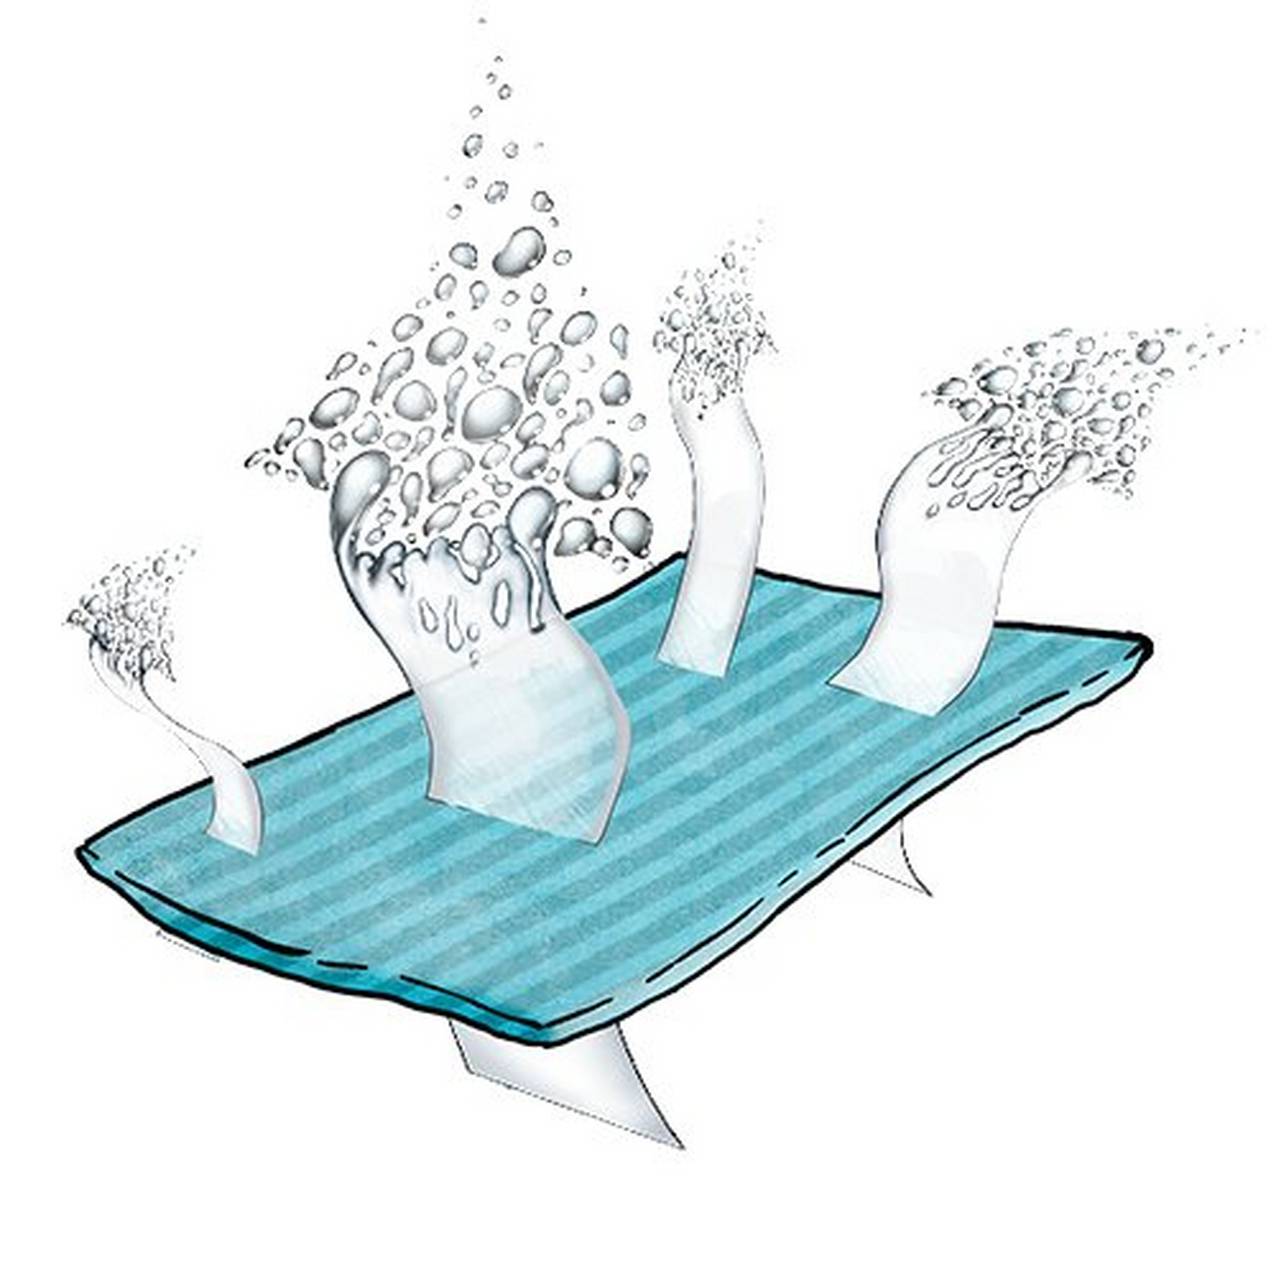 Illustration of moisture droplets in the shape of an arrow moving through fabric